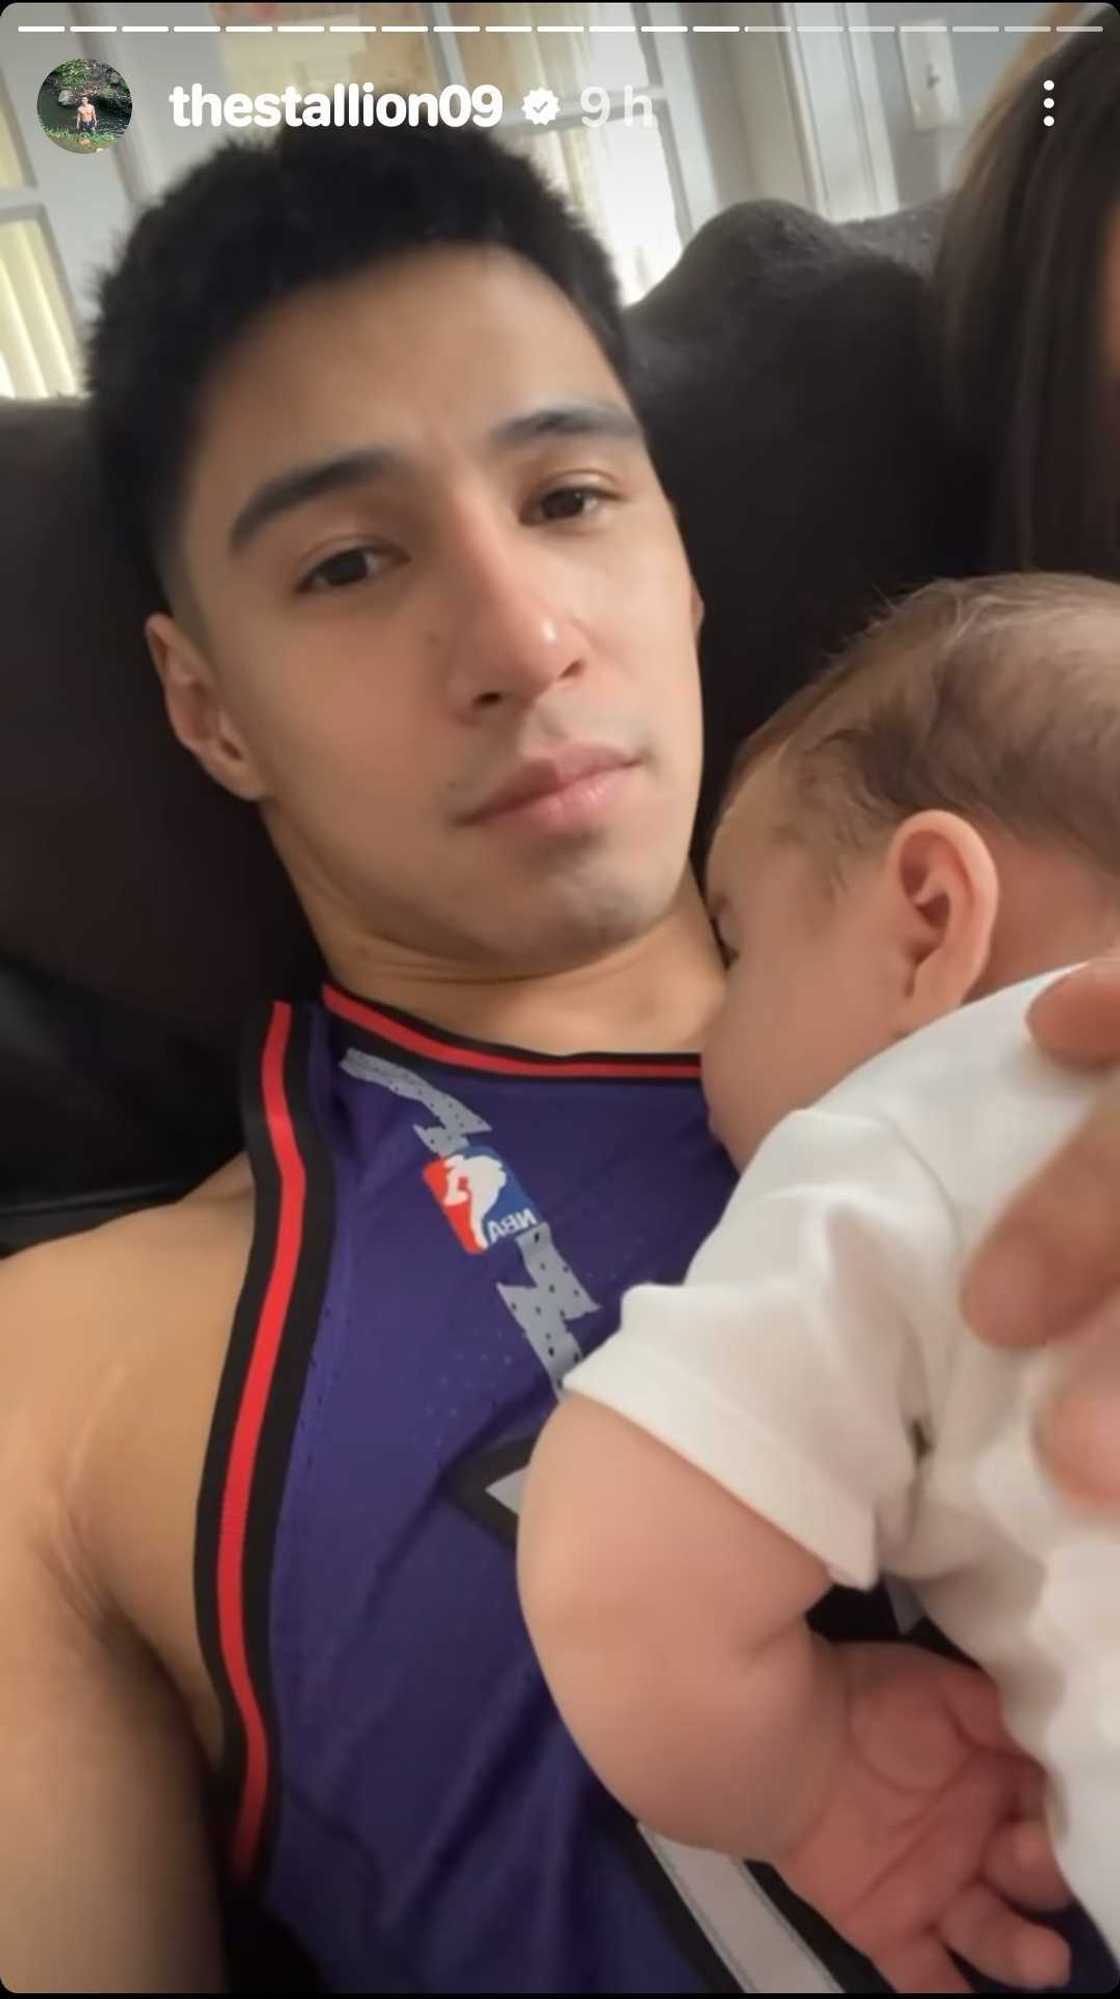 Albie Casiño shares adorable photos and clips featuring his baby boy